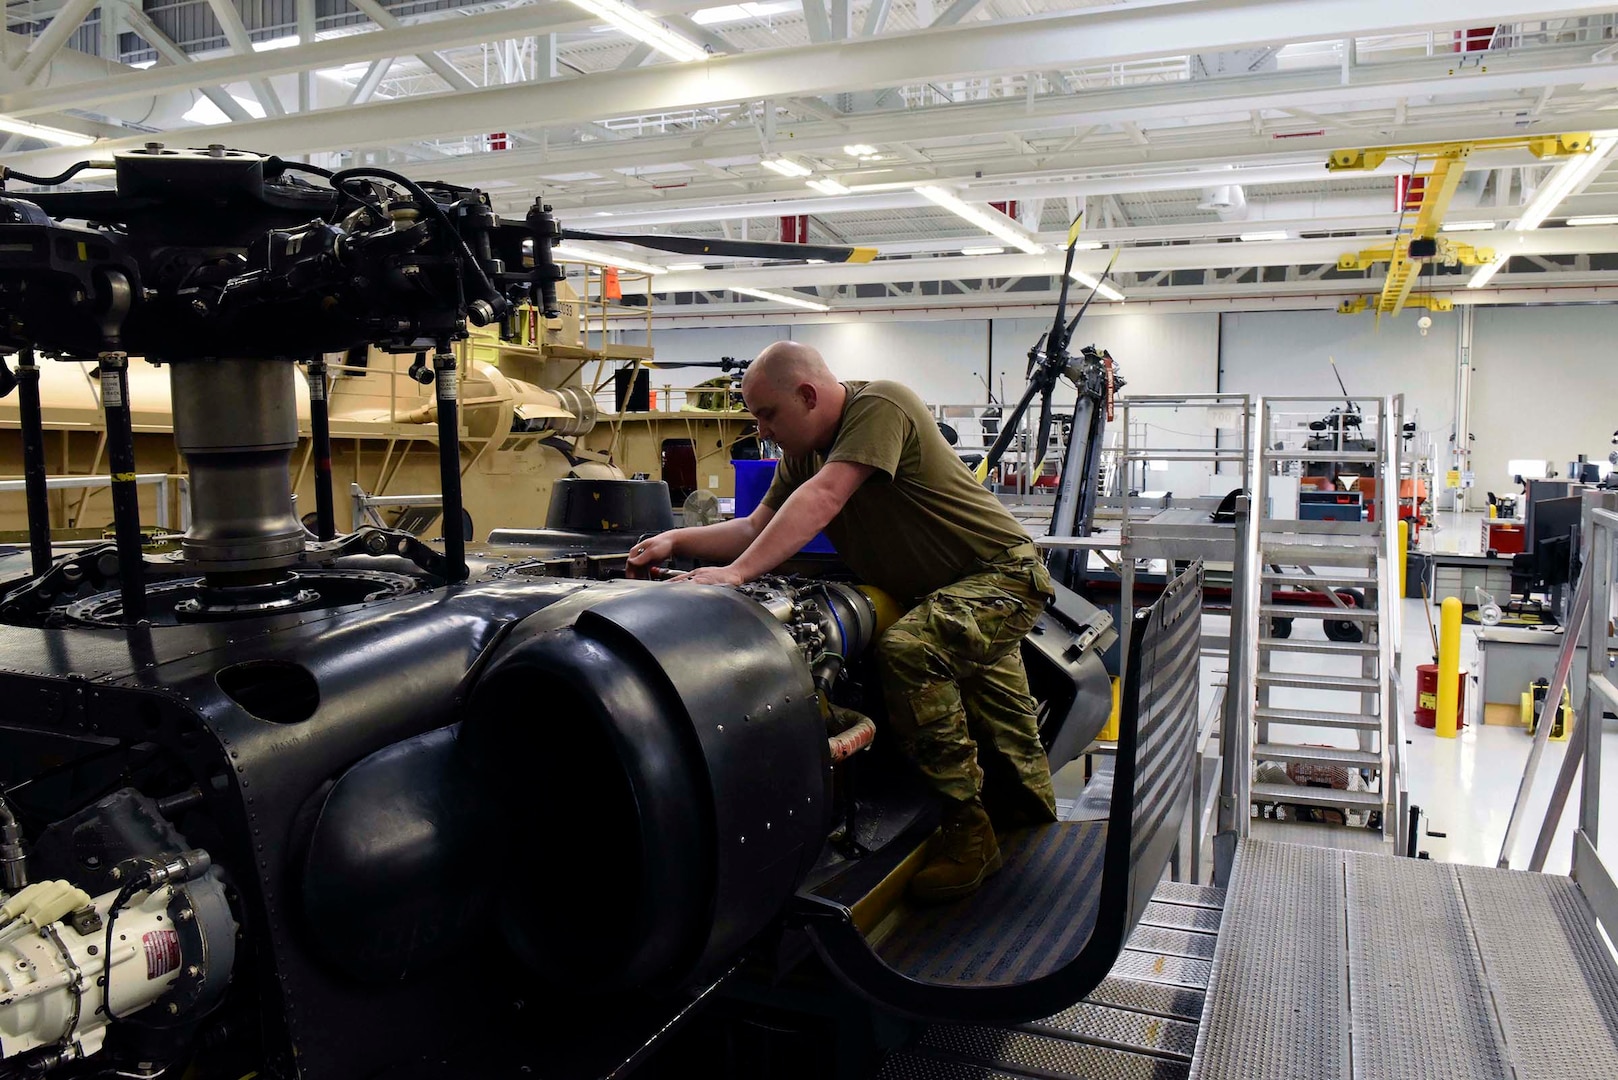 Army Sgt. Daniel Bryd, with the Tennessee Army National Guard's 1st Battalion (Air Assault), 230th Aviation Regiment, replaces an engine starter on a hardware maintenance trainer as part of a reclassification course at the Eastern Army National Guard Aviation Training Site in Fort Indiantown Gap, Pennsylvania, Feb. 27, 2019. The trainer is a non-flyable air frame that gives students hands-on experience with maintenance and repair procedures.